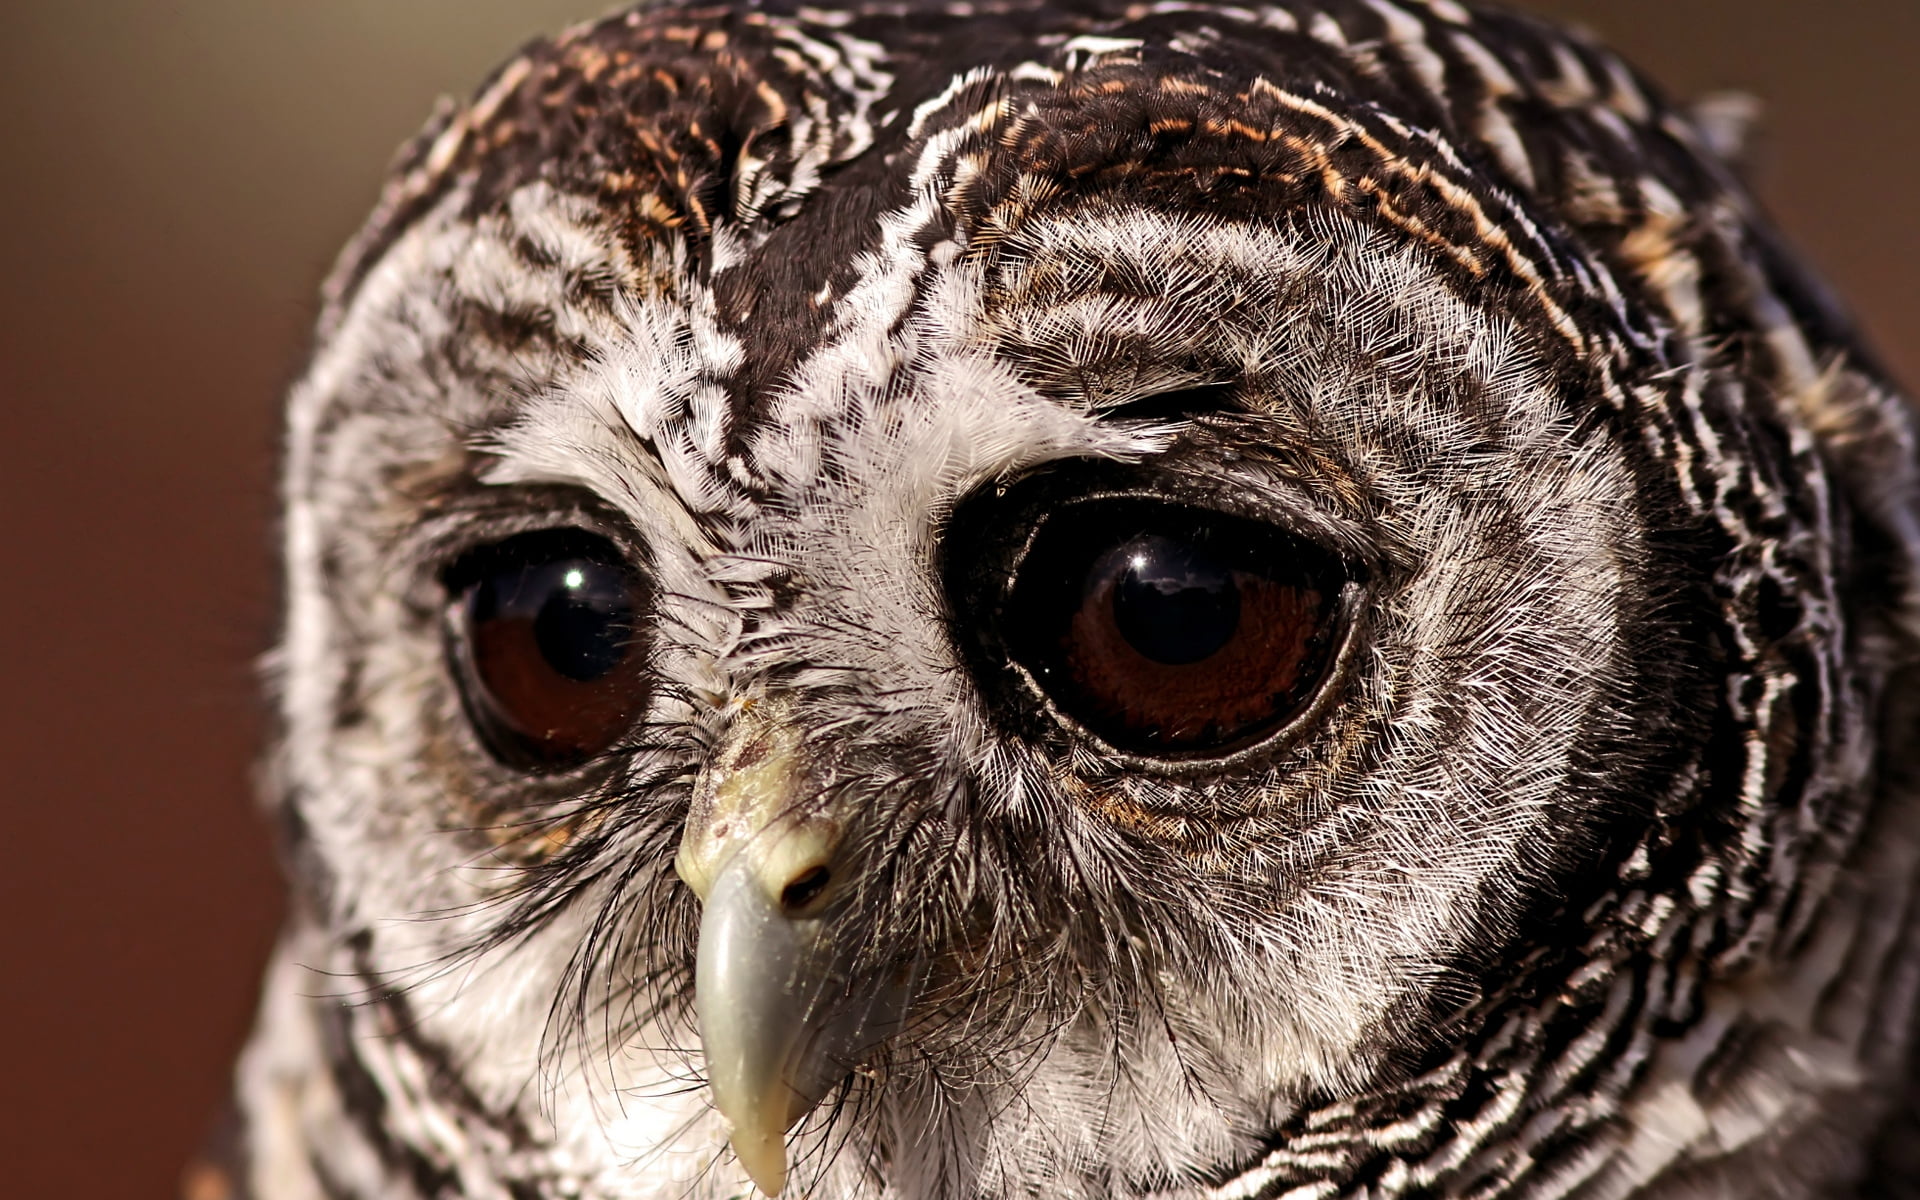 brown and white owl face close-up photo